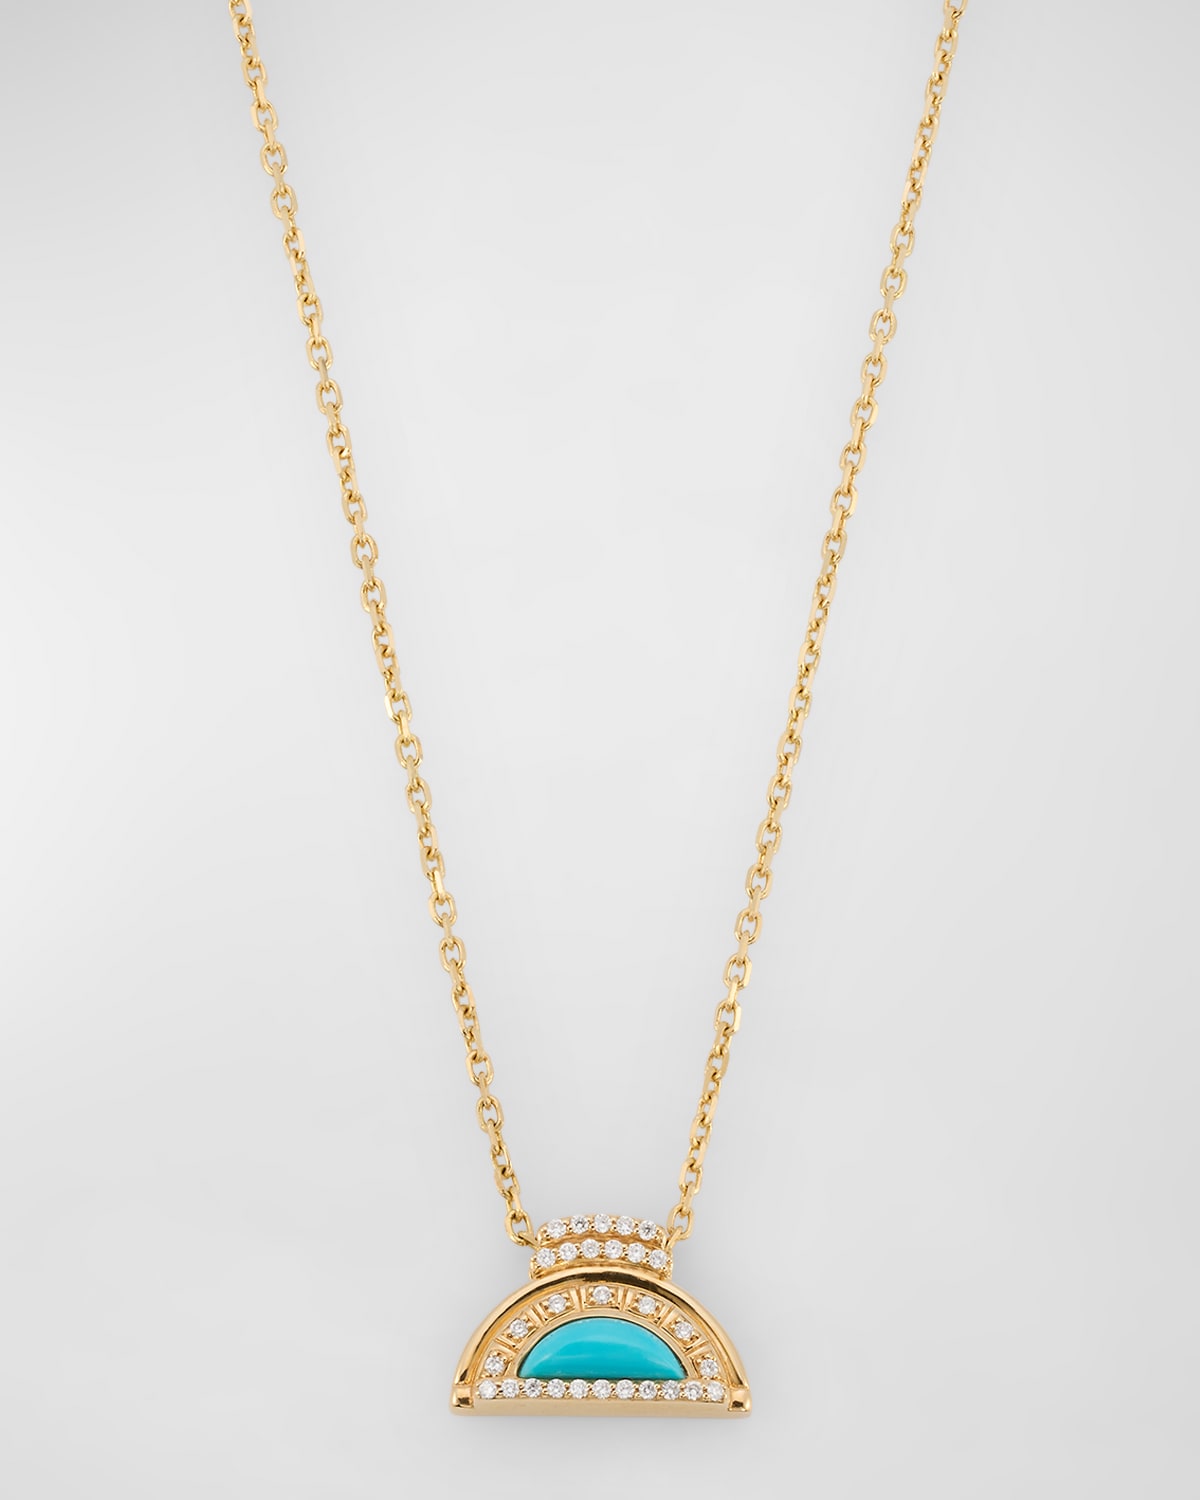 18K Yellow Gold Necklace with Turquoise Inlay and GH-SI Diamonds, 18"L